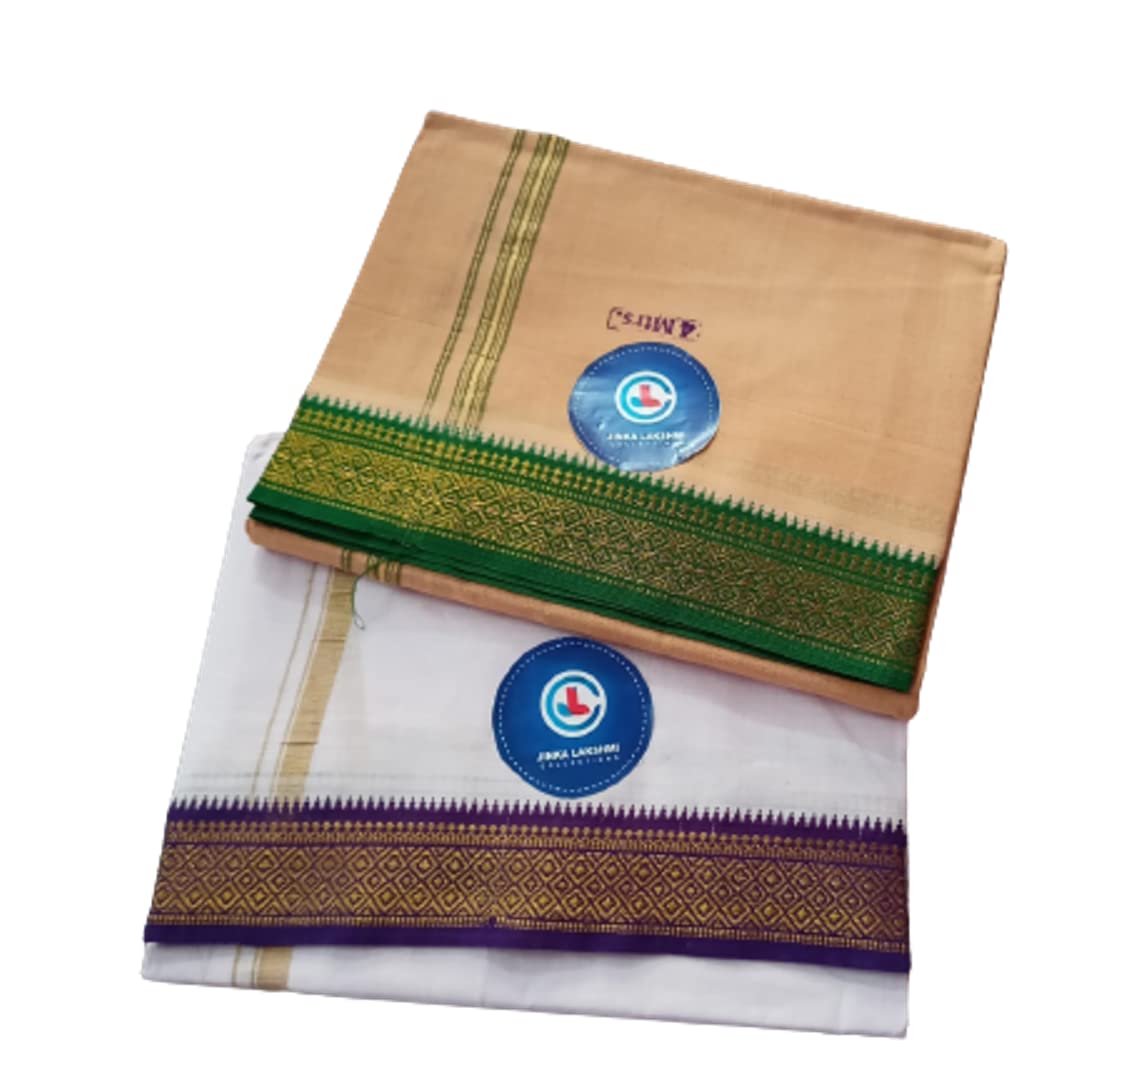 Jinka Lakshmi Collections 100% Handloom Cotton Dhoti With Big Borders 4 Meters Unstitched Pack of 2 (Multicolor-8)